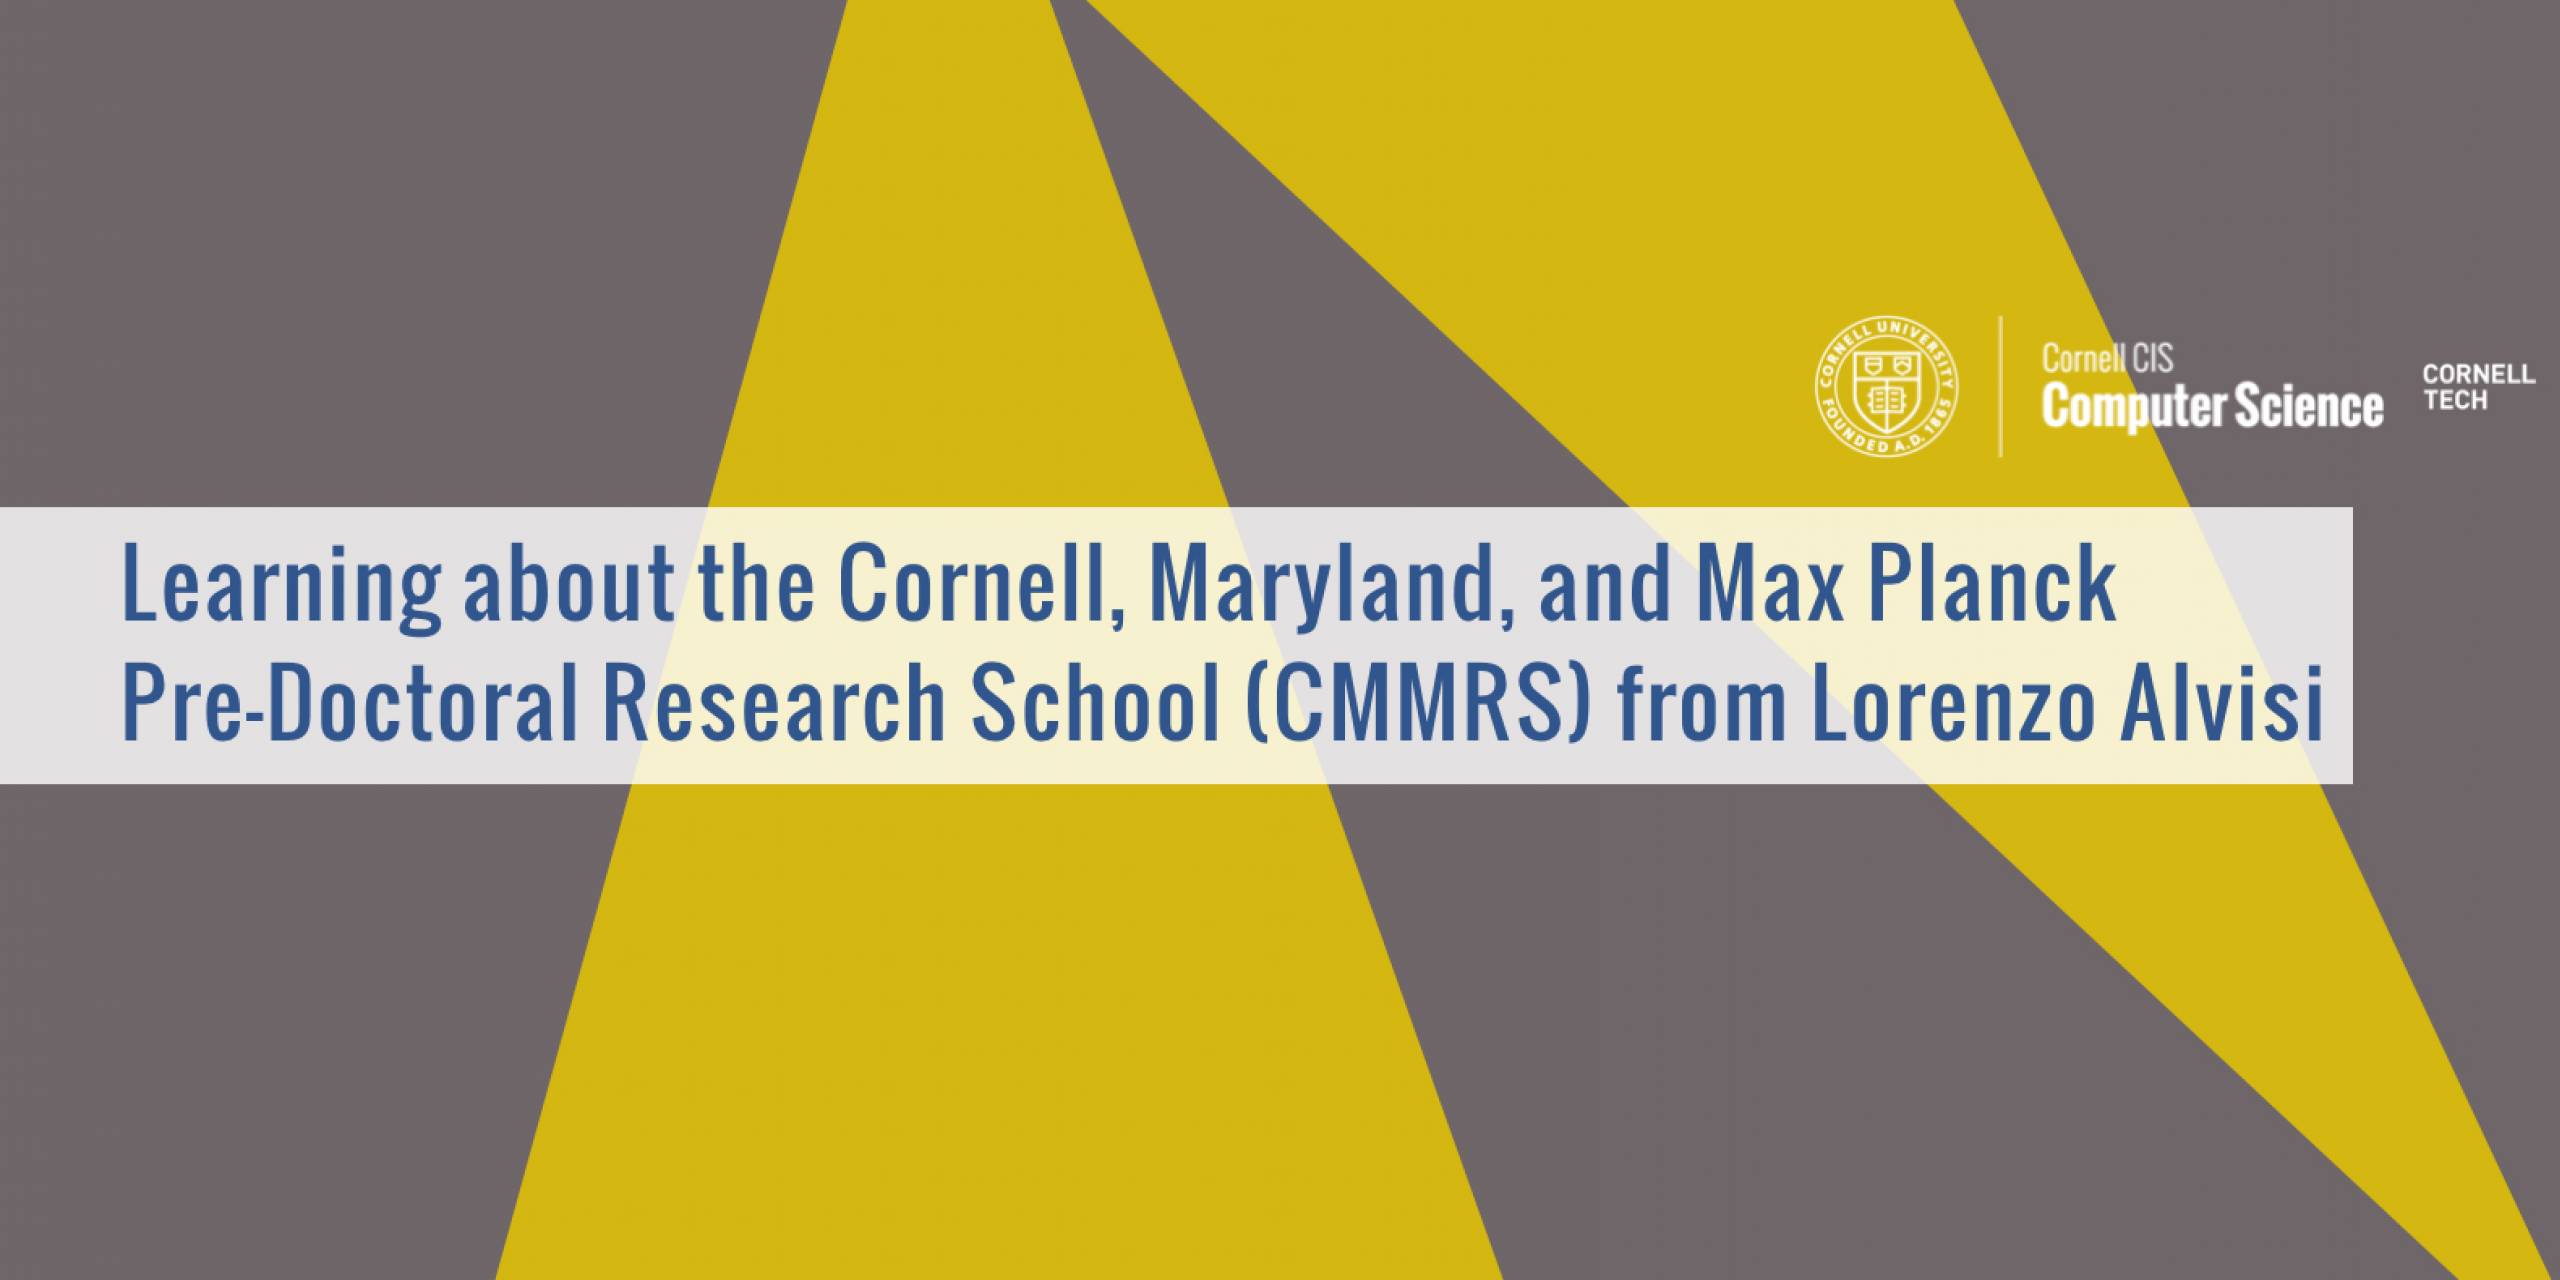 Learning about the Cornell, Maryland, and Max Planck Pre-Doctoral Research School (CMMRS) from Lorenzo Alvisi